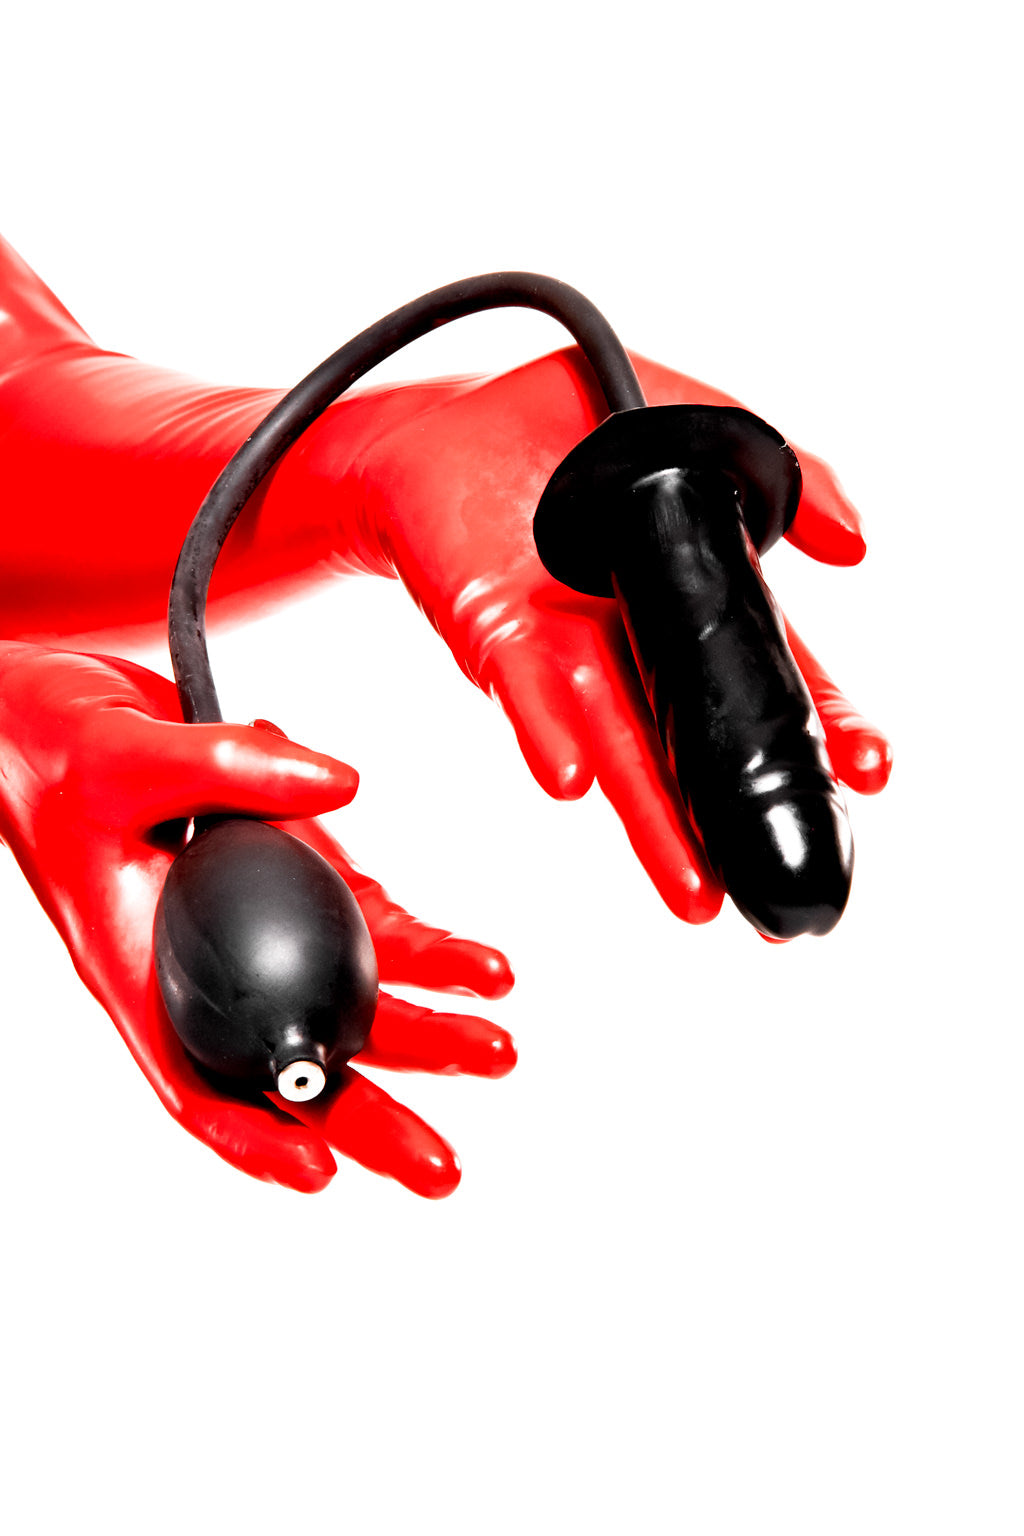 Red latex gloves holding a medium inflatable butt plug.